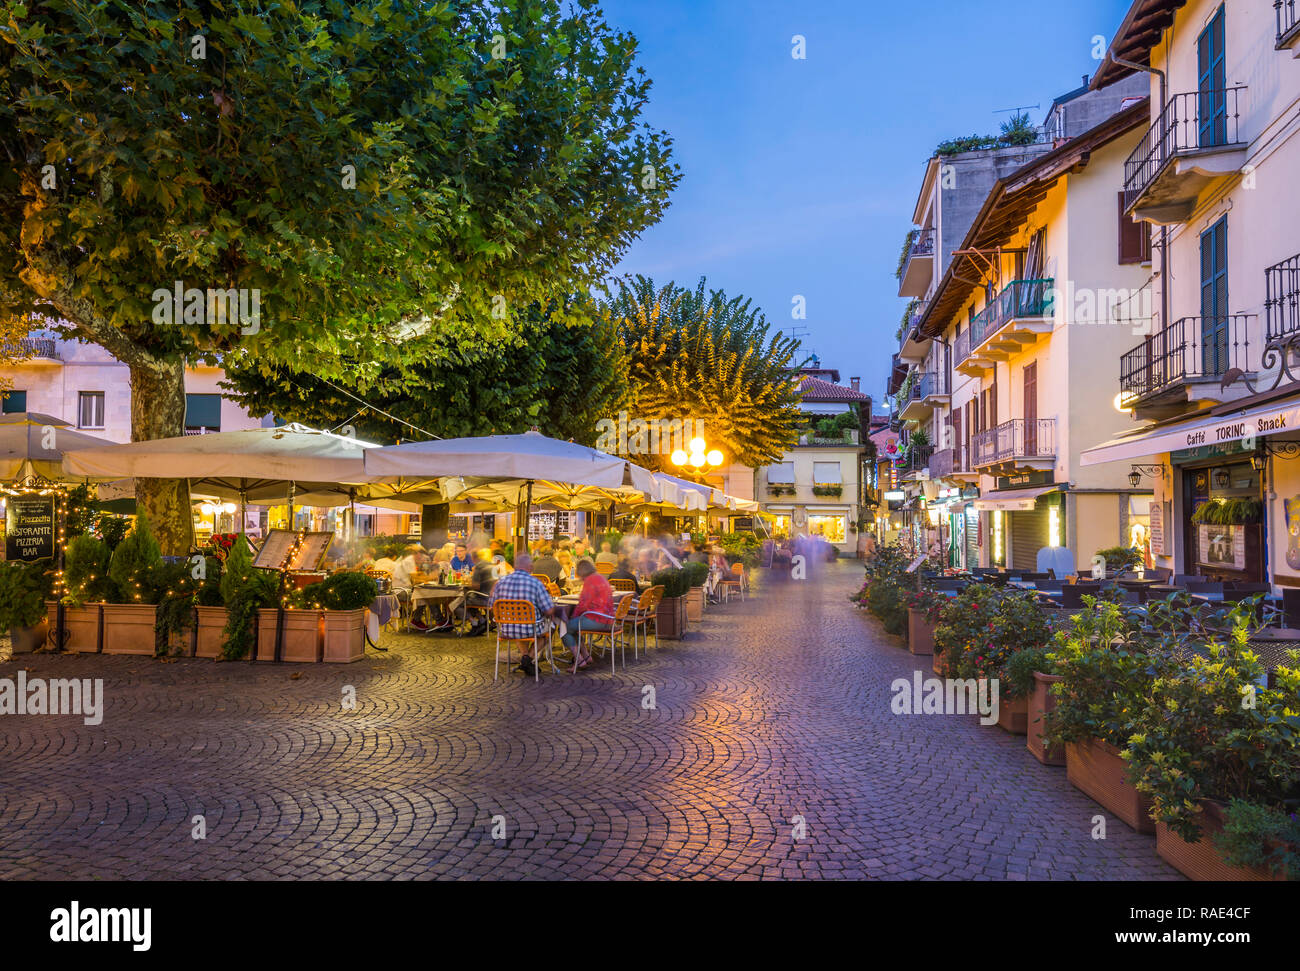 View of restaurants and souvenir shops in Stresa at dusk, Lago Maggiore, Piedmont, Italian Lakes, Italy, Europe Stock Photo